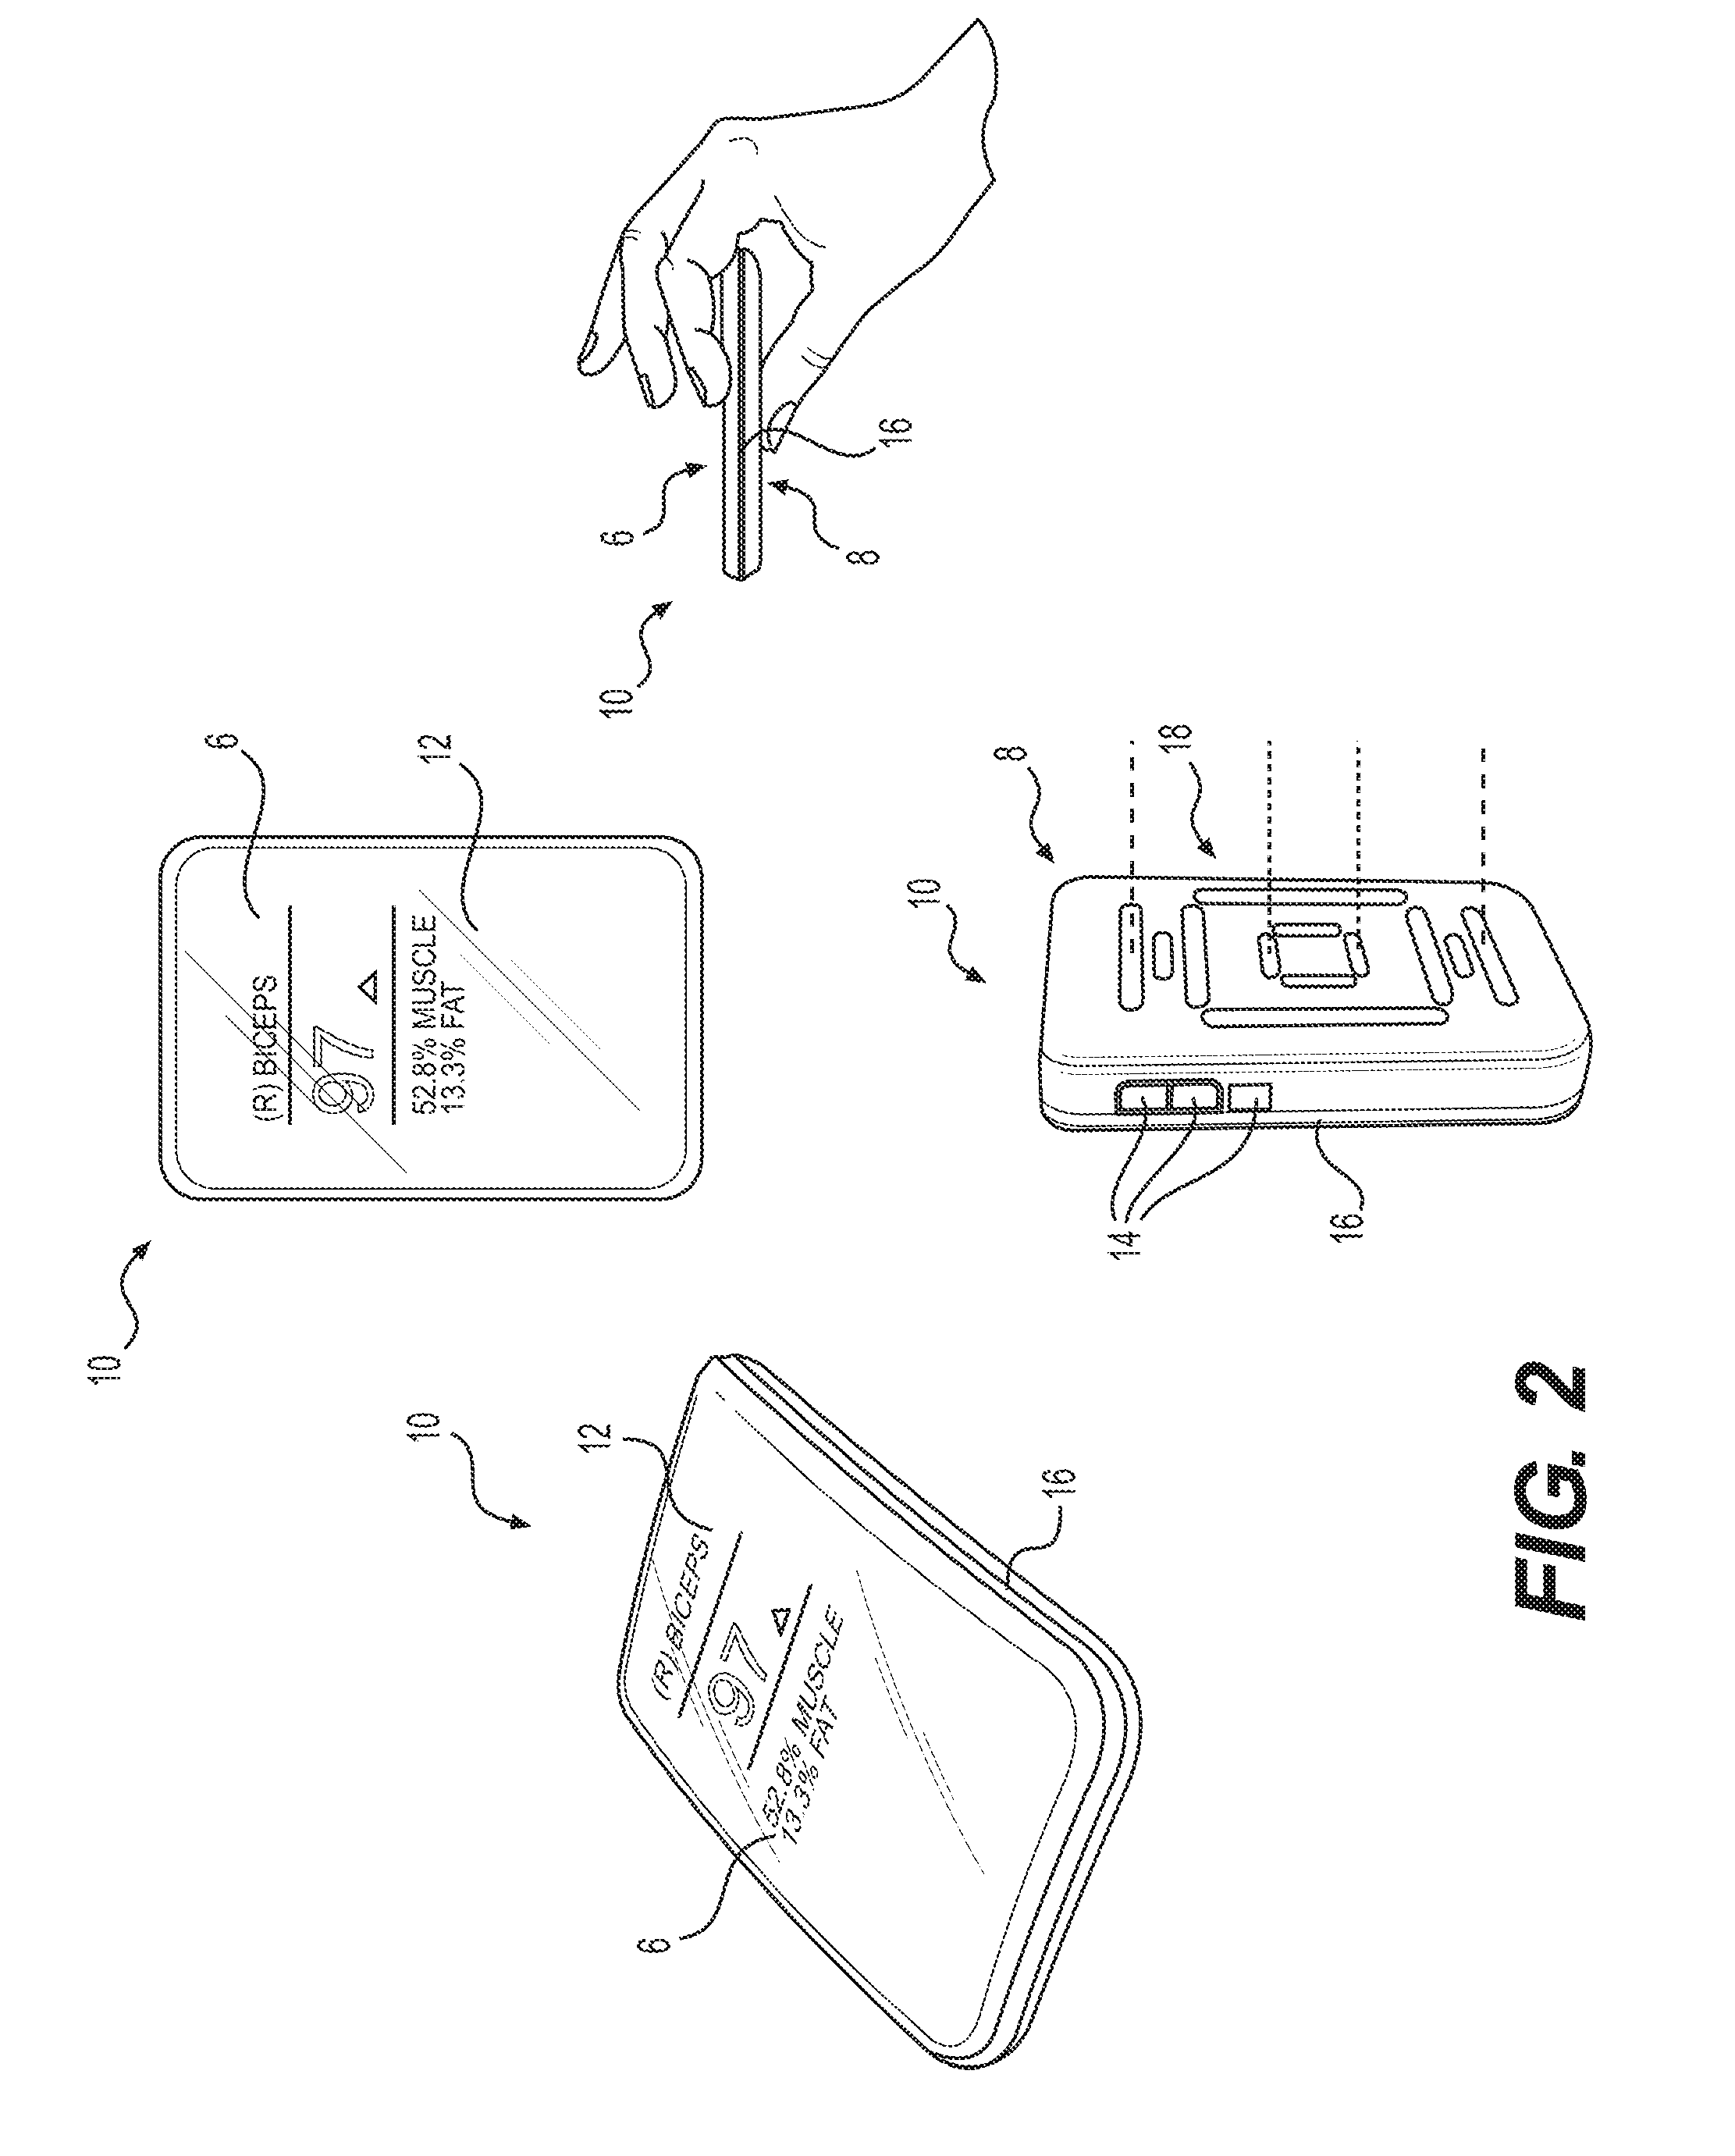 Systems and methods for measurement of bioimpedance